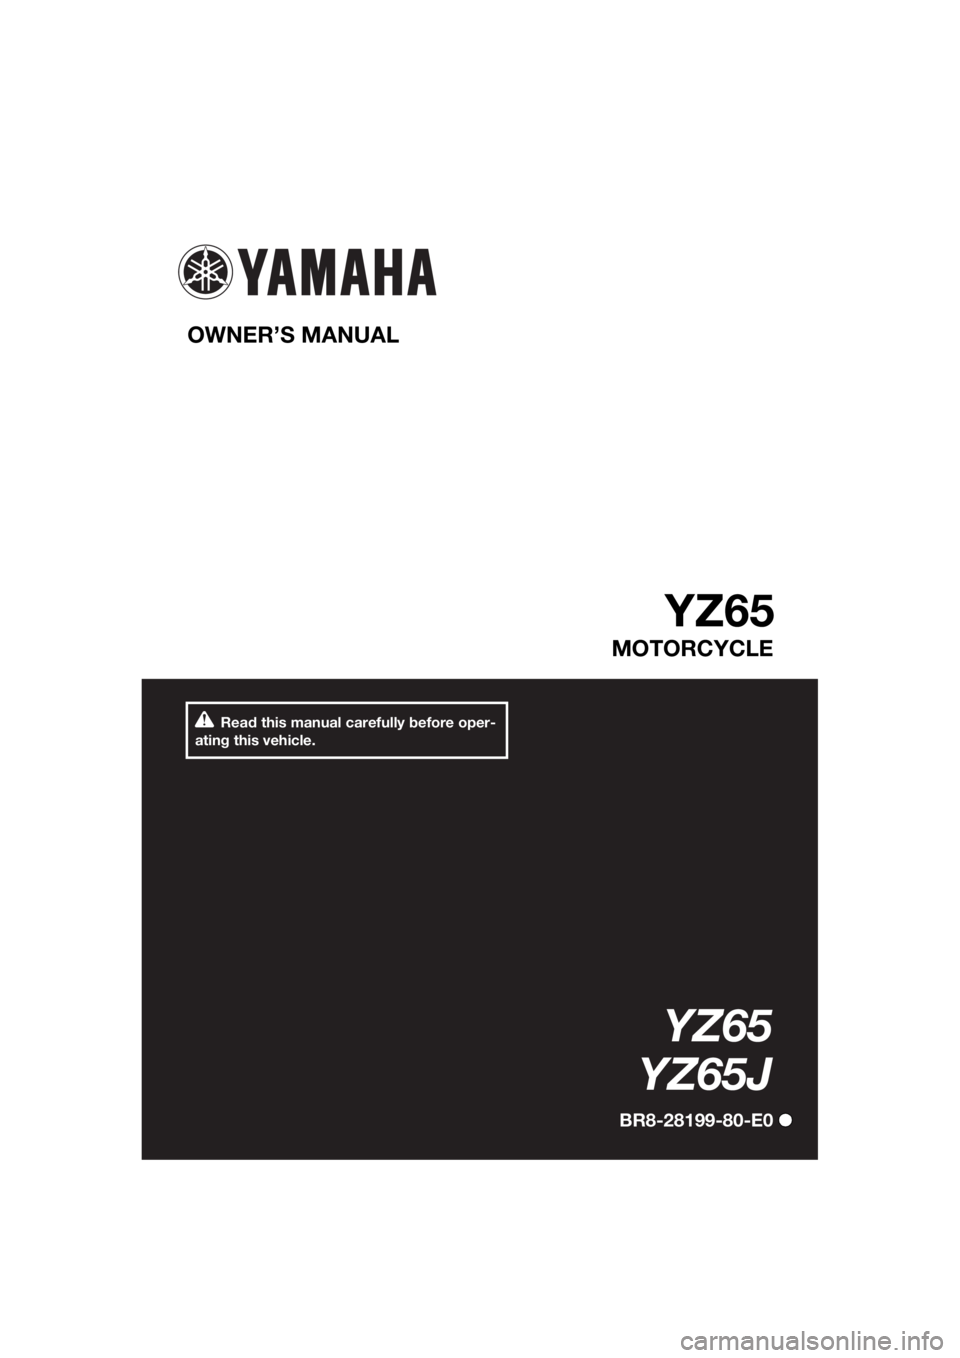 YAMAHA YZ65 2018  Owners Manual Read this manual carefully before oper-
ating this vehicle.
OWNER’S MANUAL 
YZ65
MOTORCYCLE
YZ65
YZ65J
BR8-28199-80-E0
UBR880E0.book  Page 1  Friday, April 6, 2018  11:10 AM 